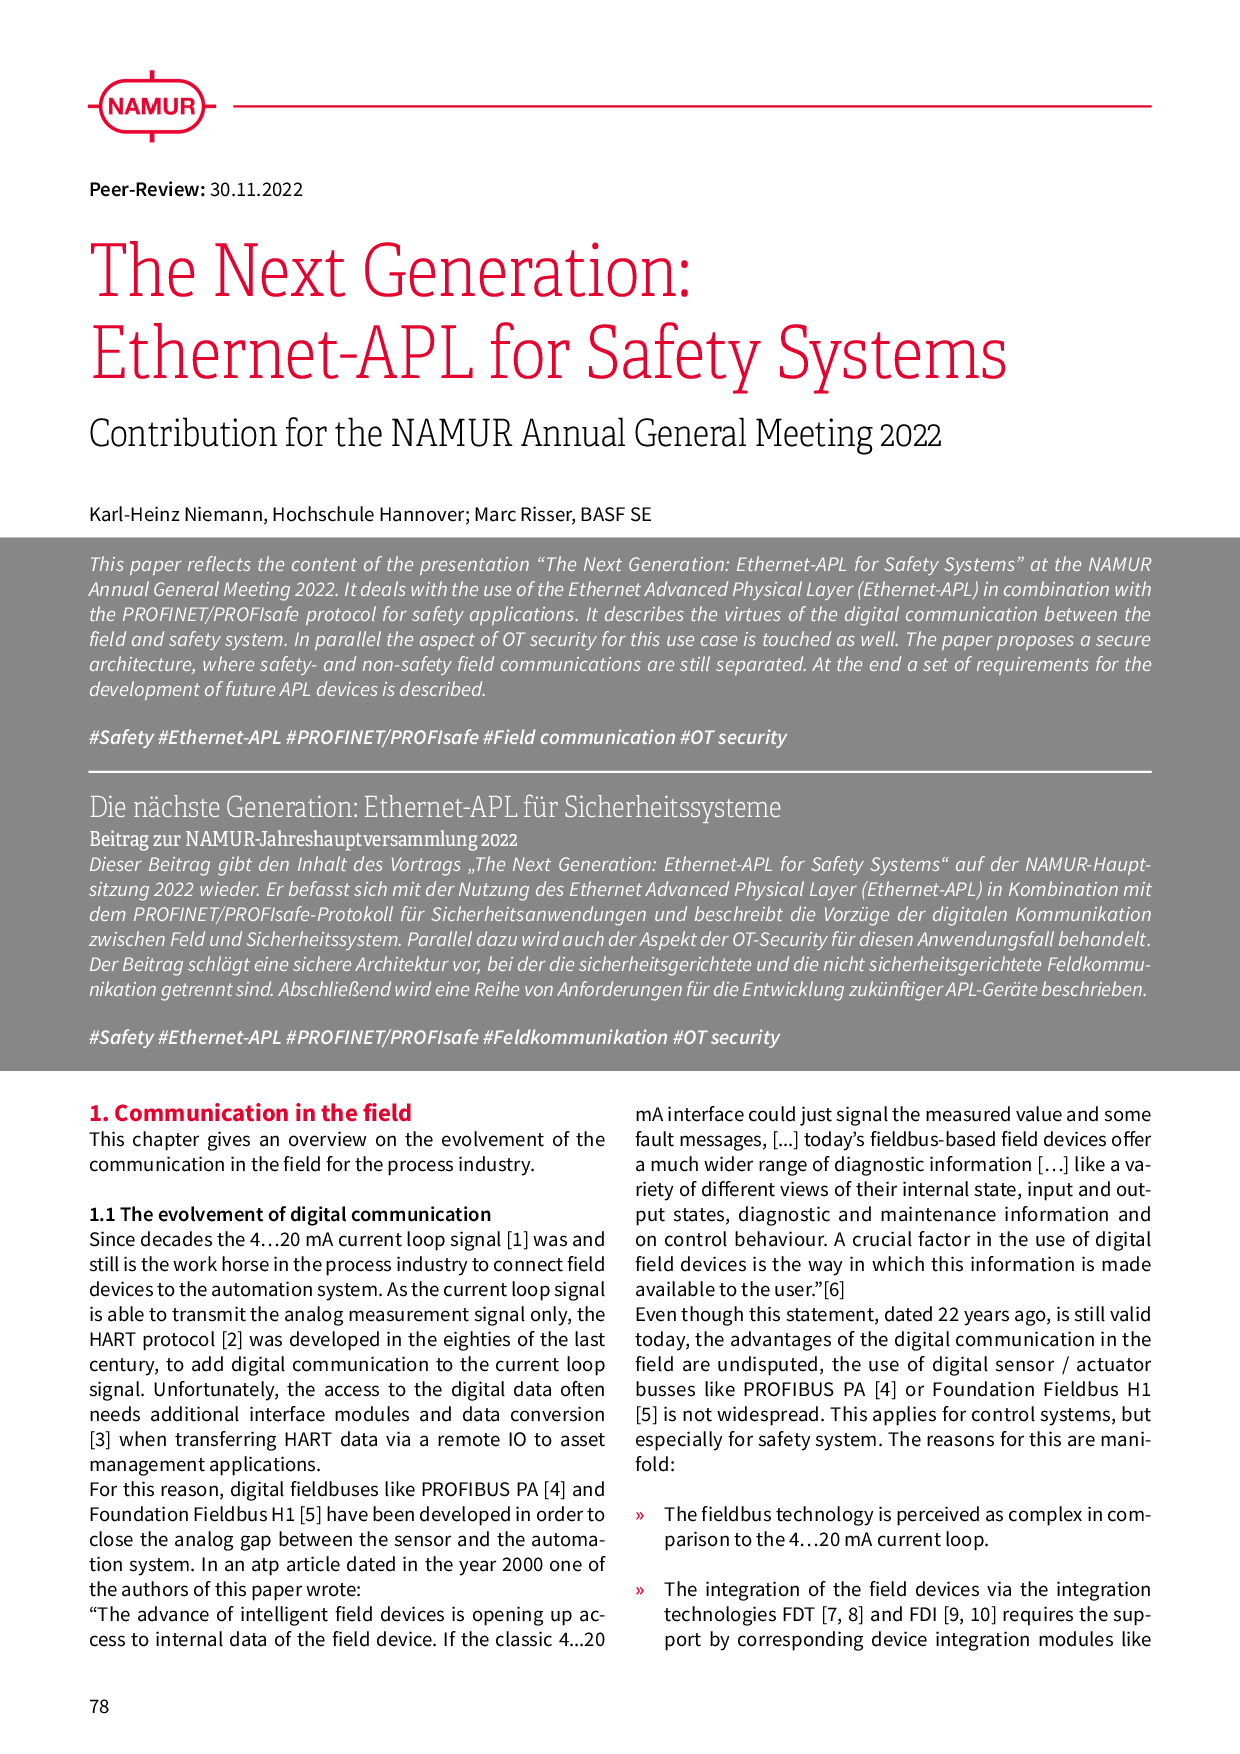 The Next Generation: Ethernet-APL for Safety Systems